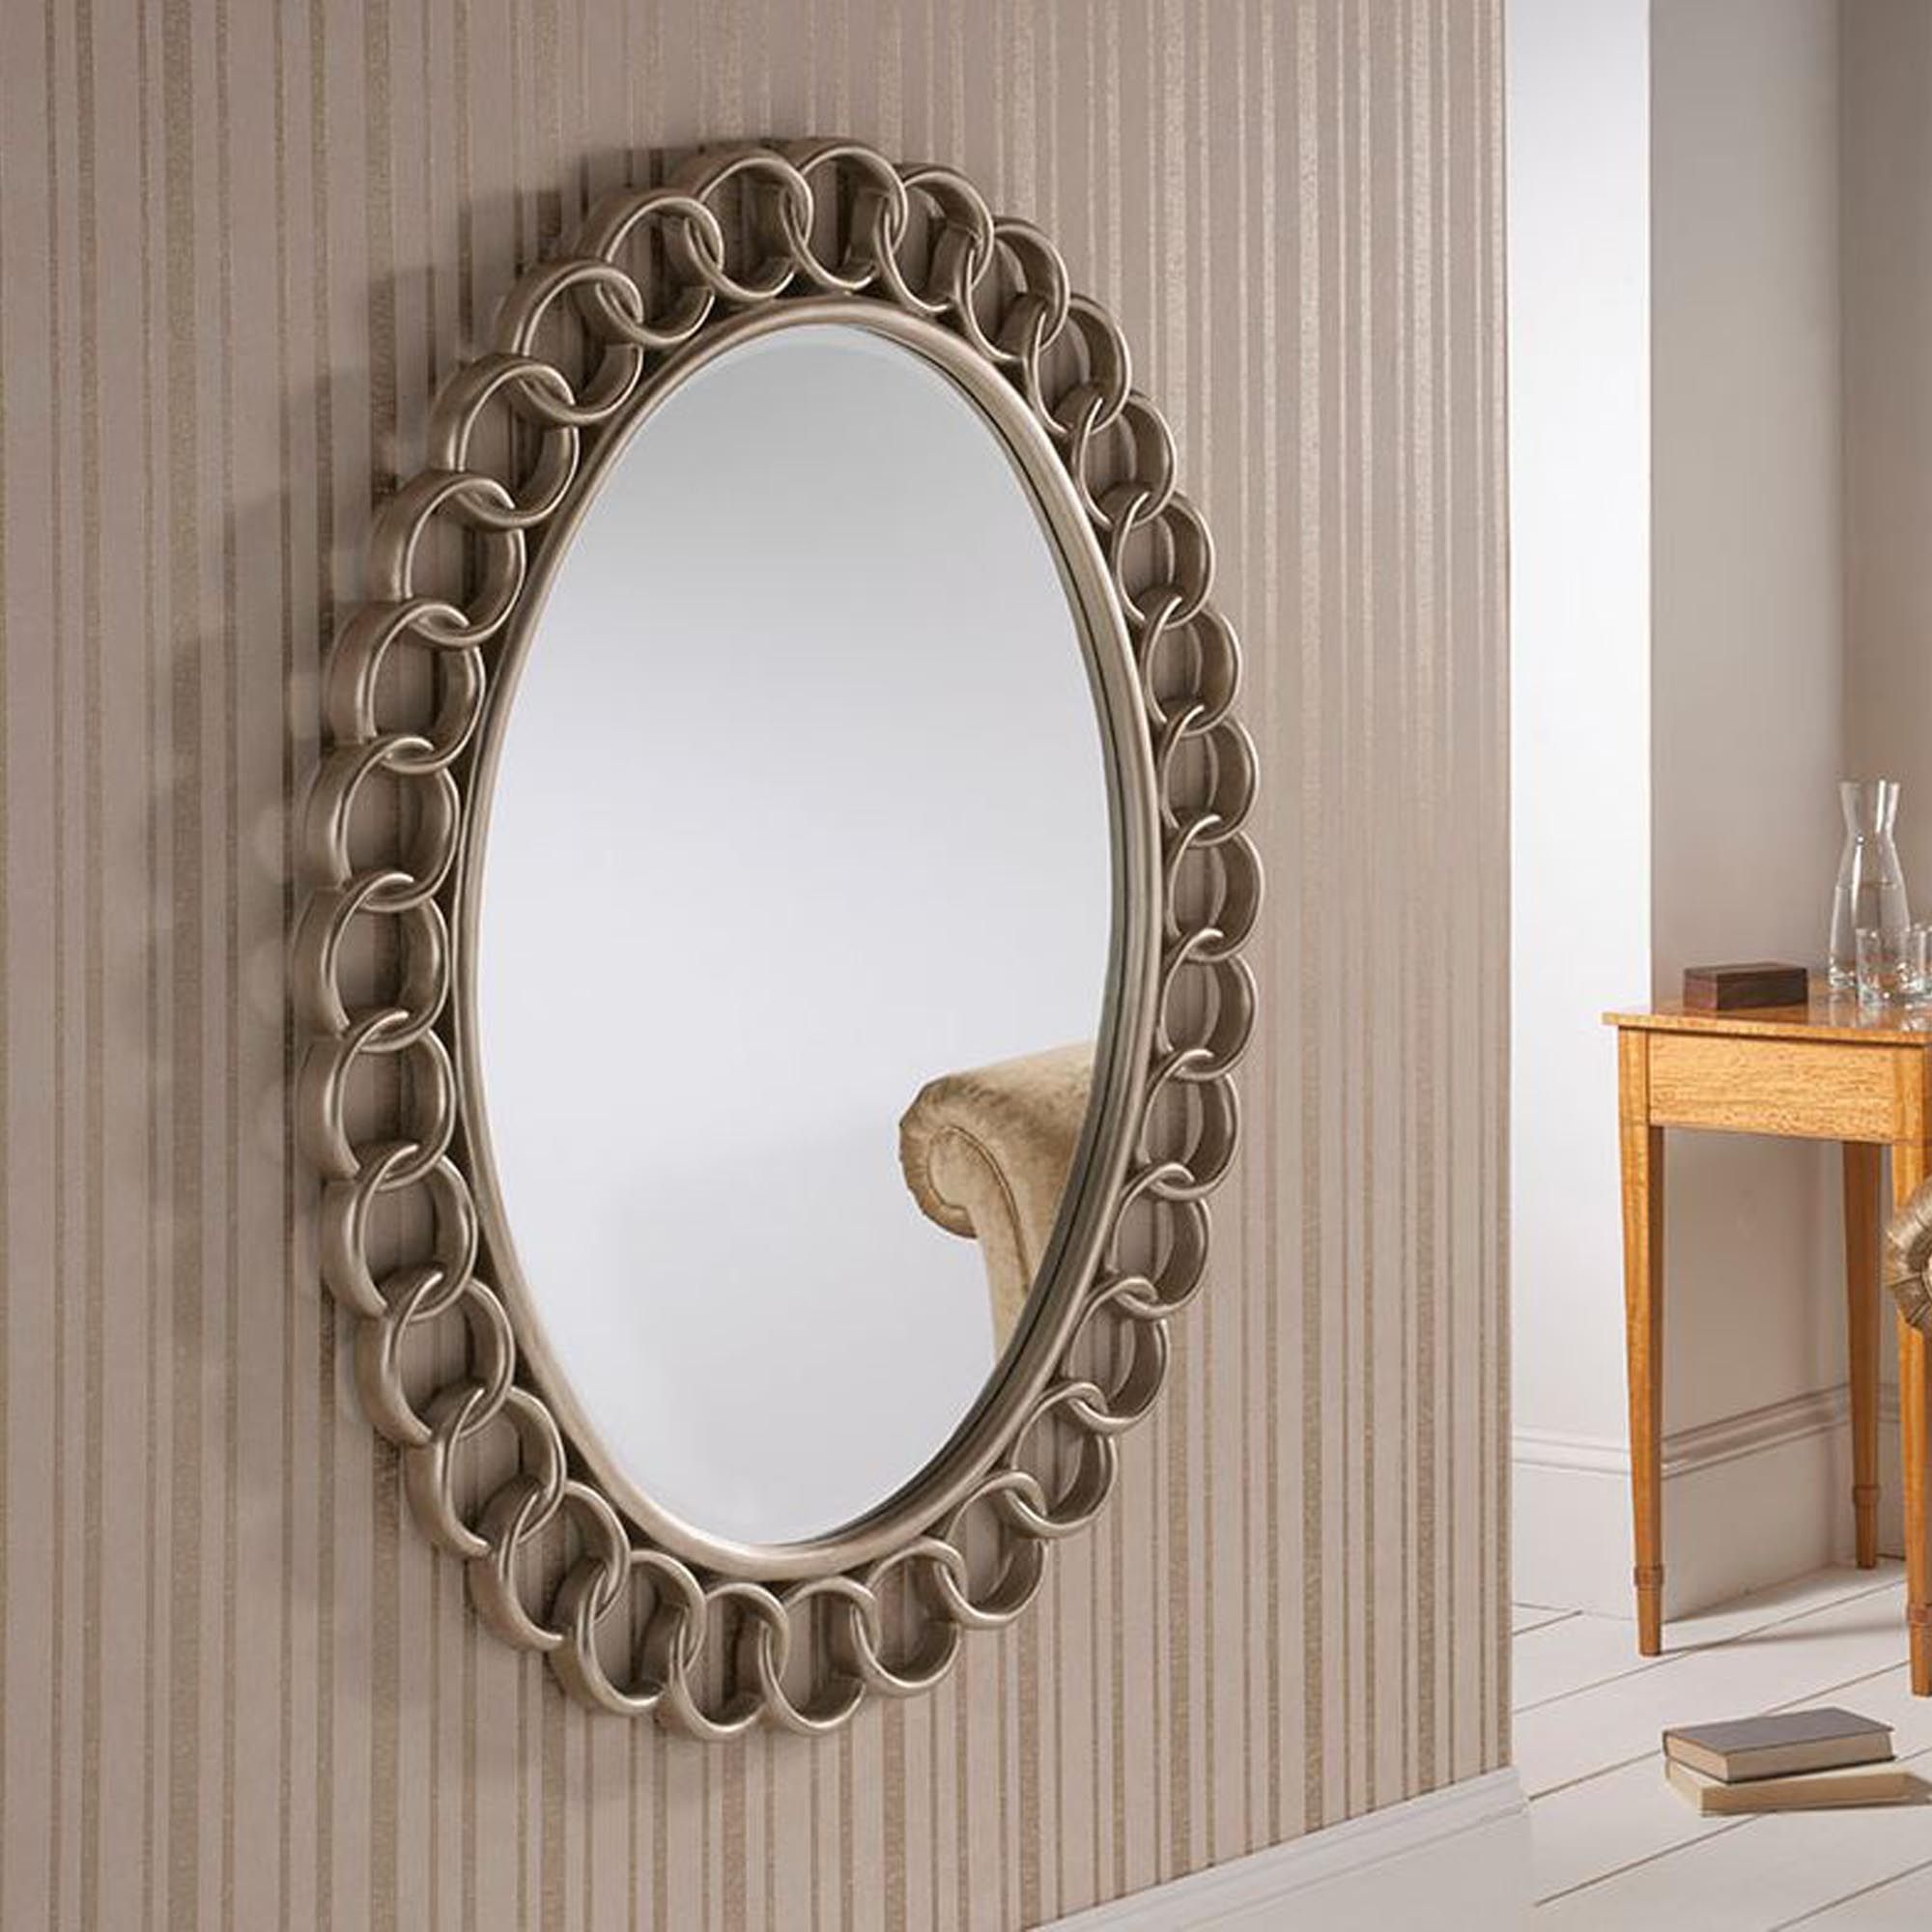 Loop Link Contemporary Silver Wall Mirror | Homesdirect365 Inside Wall Mirrors (View 10 of 15)